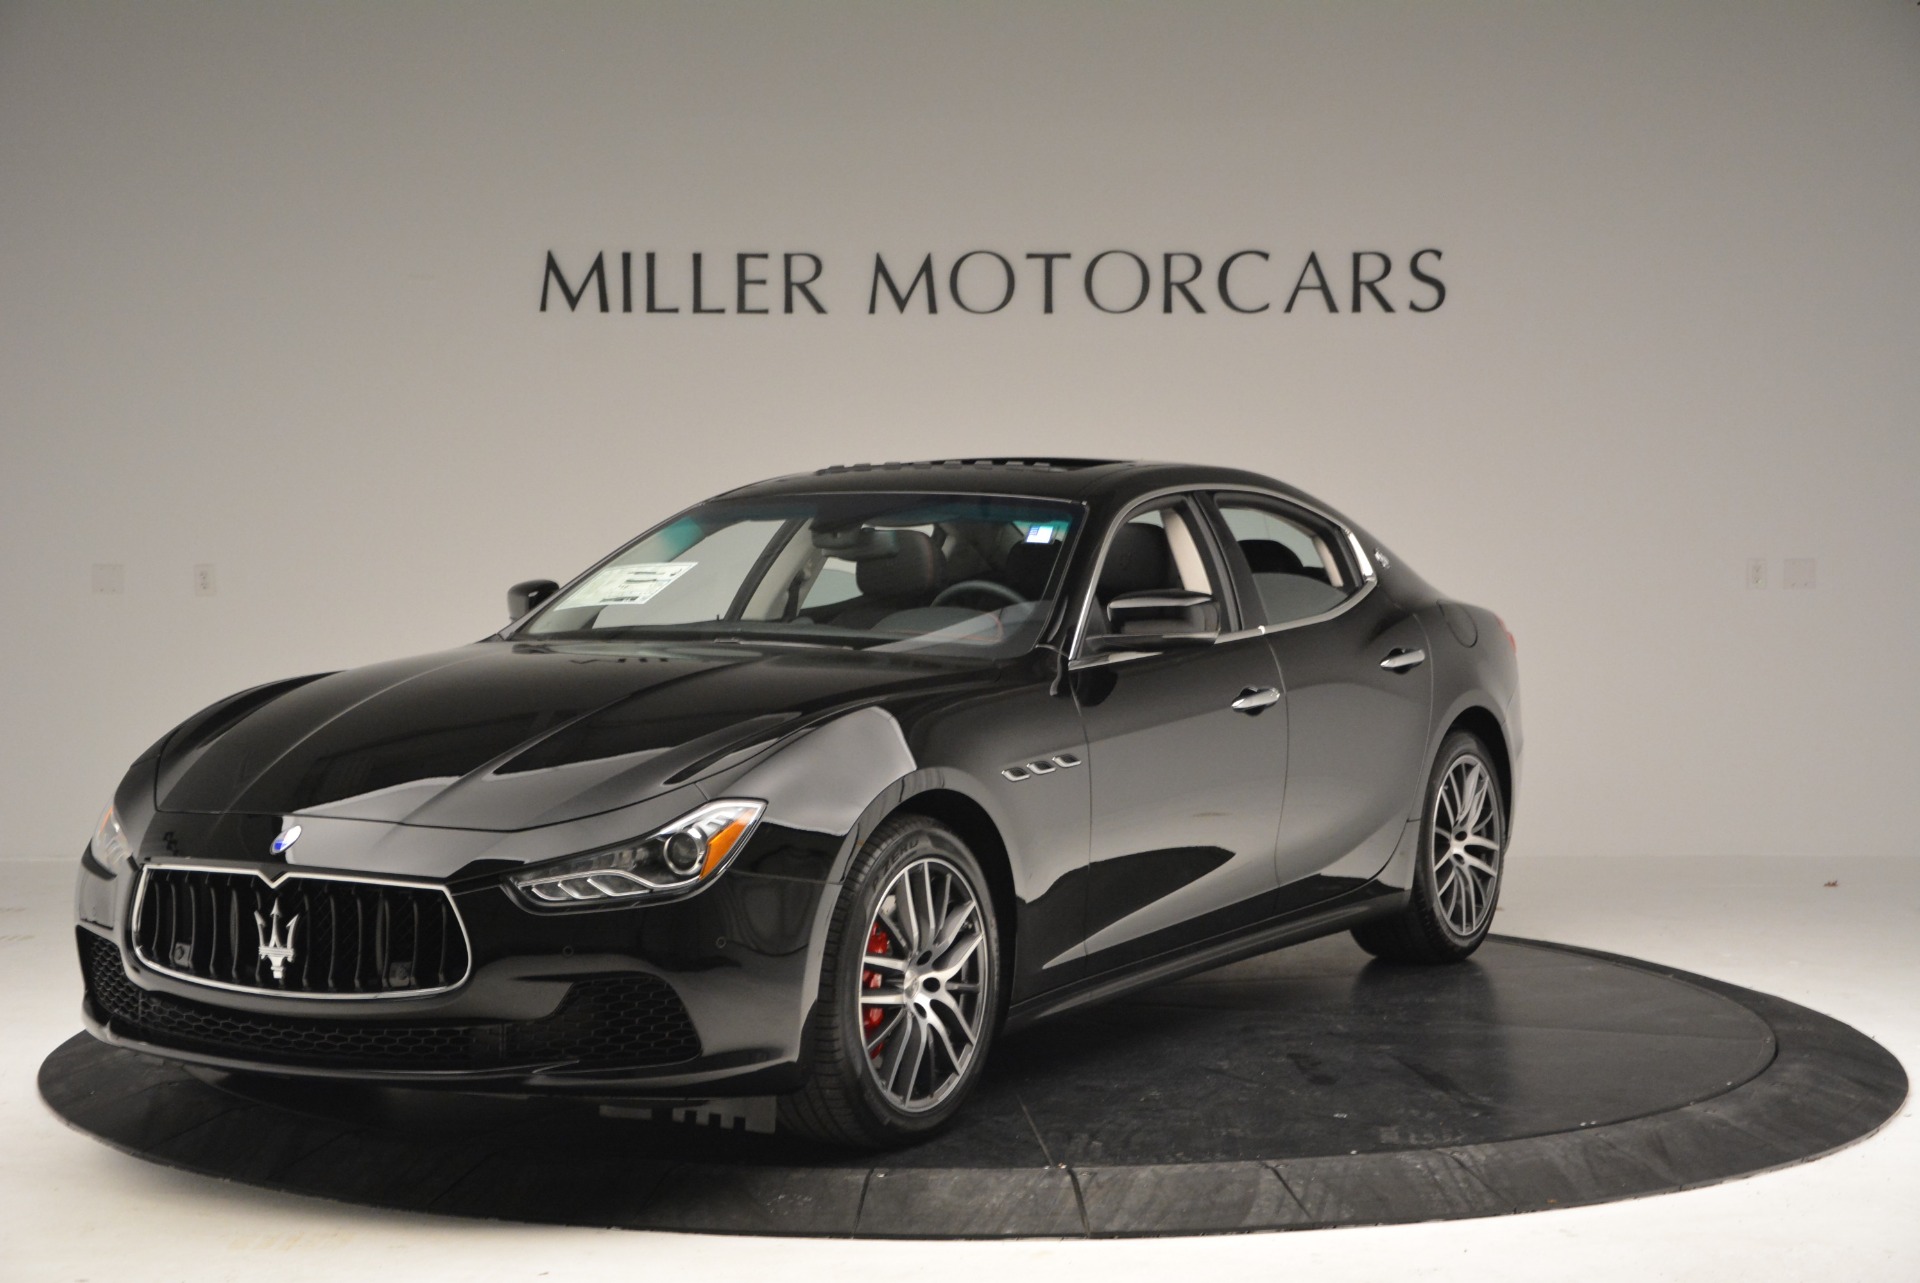 Used 2017 Maserati Ghibli S Q4 - EX Loaner for sale Sold at Rolls-Royce Motor Cars Greenwich in Greenwich CT 06830 1